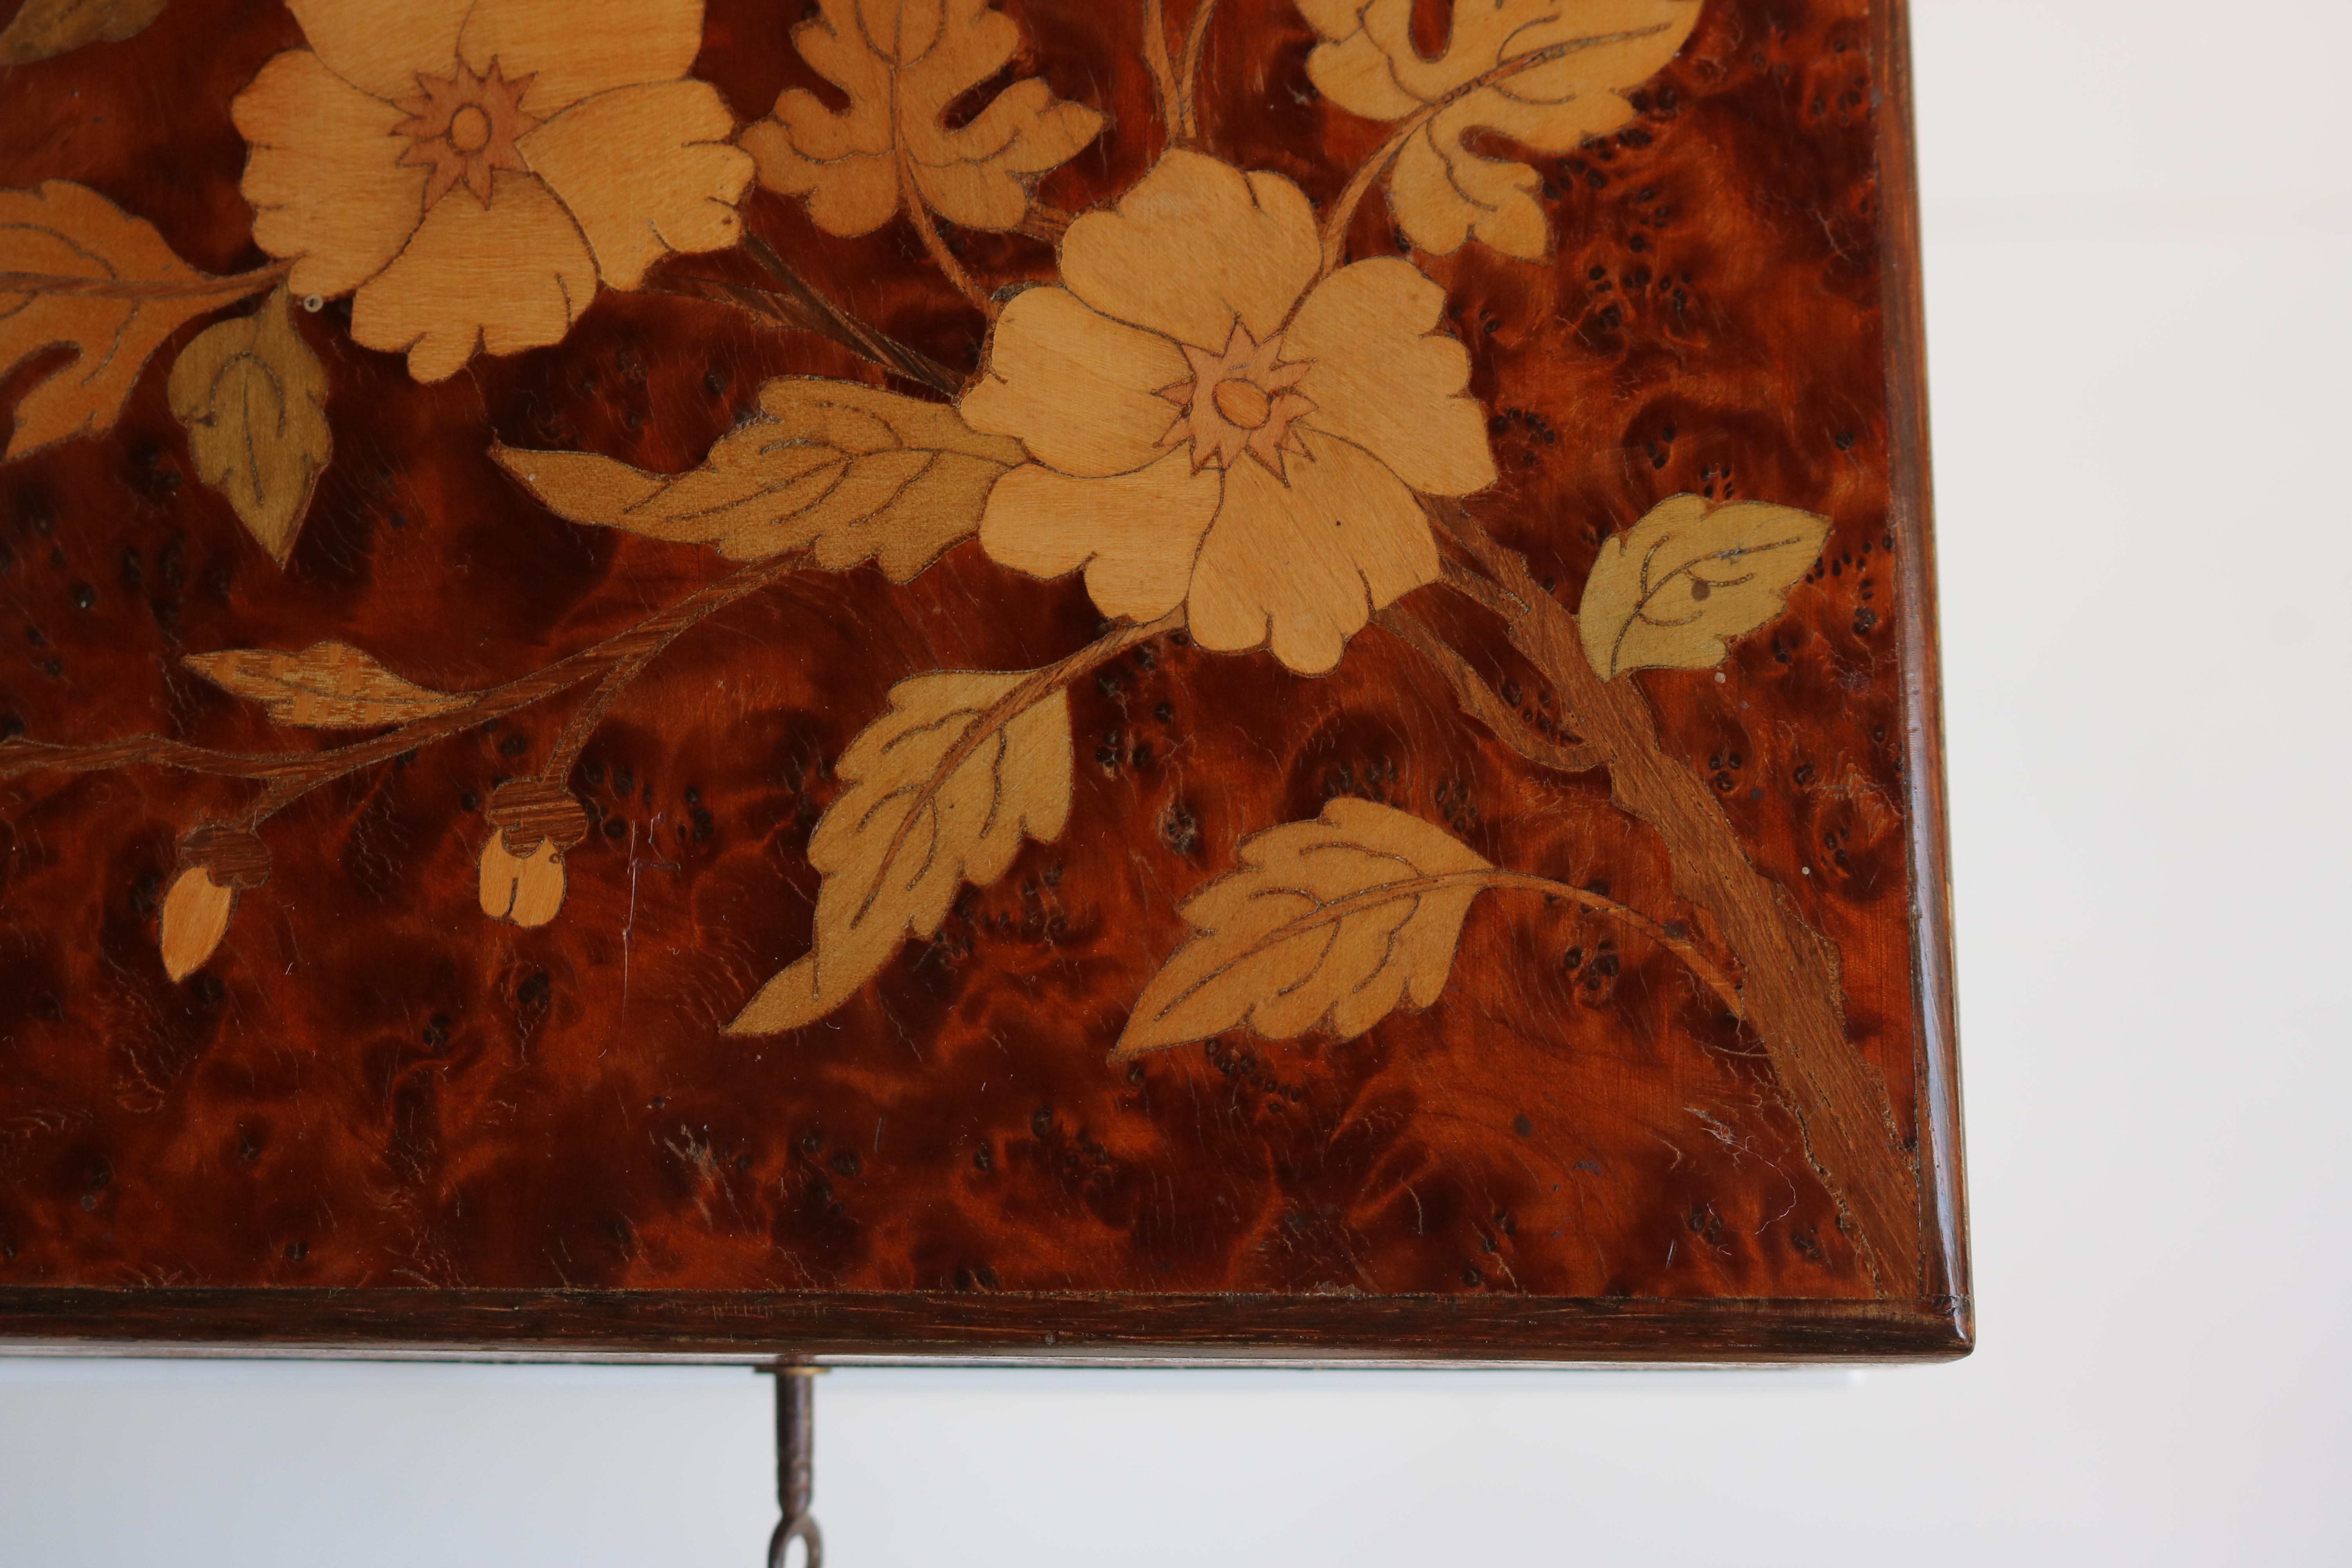 Romantic Antique French Art Nouveau Jewelry Box in Burl Wood & Floral Inlay 1900 For Sale 8